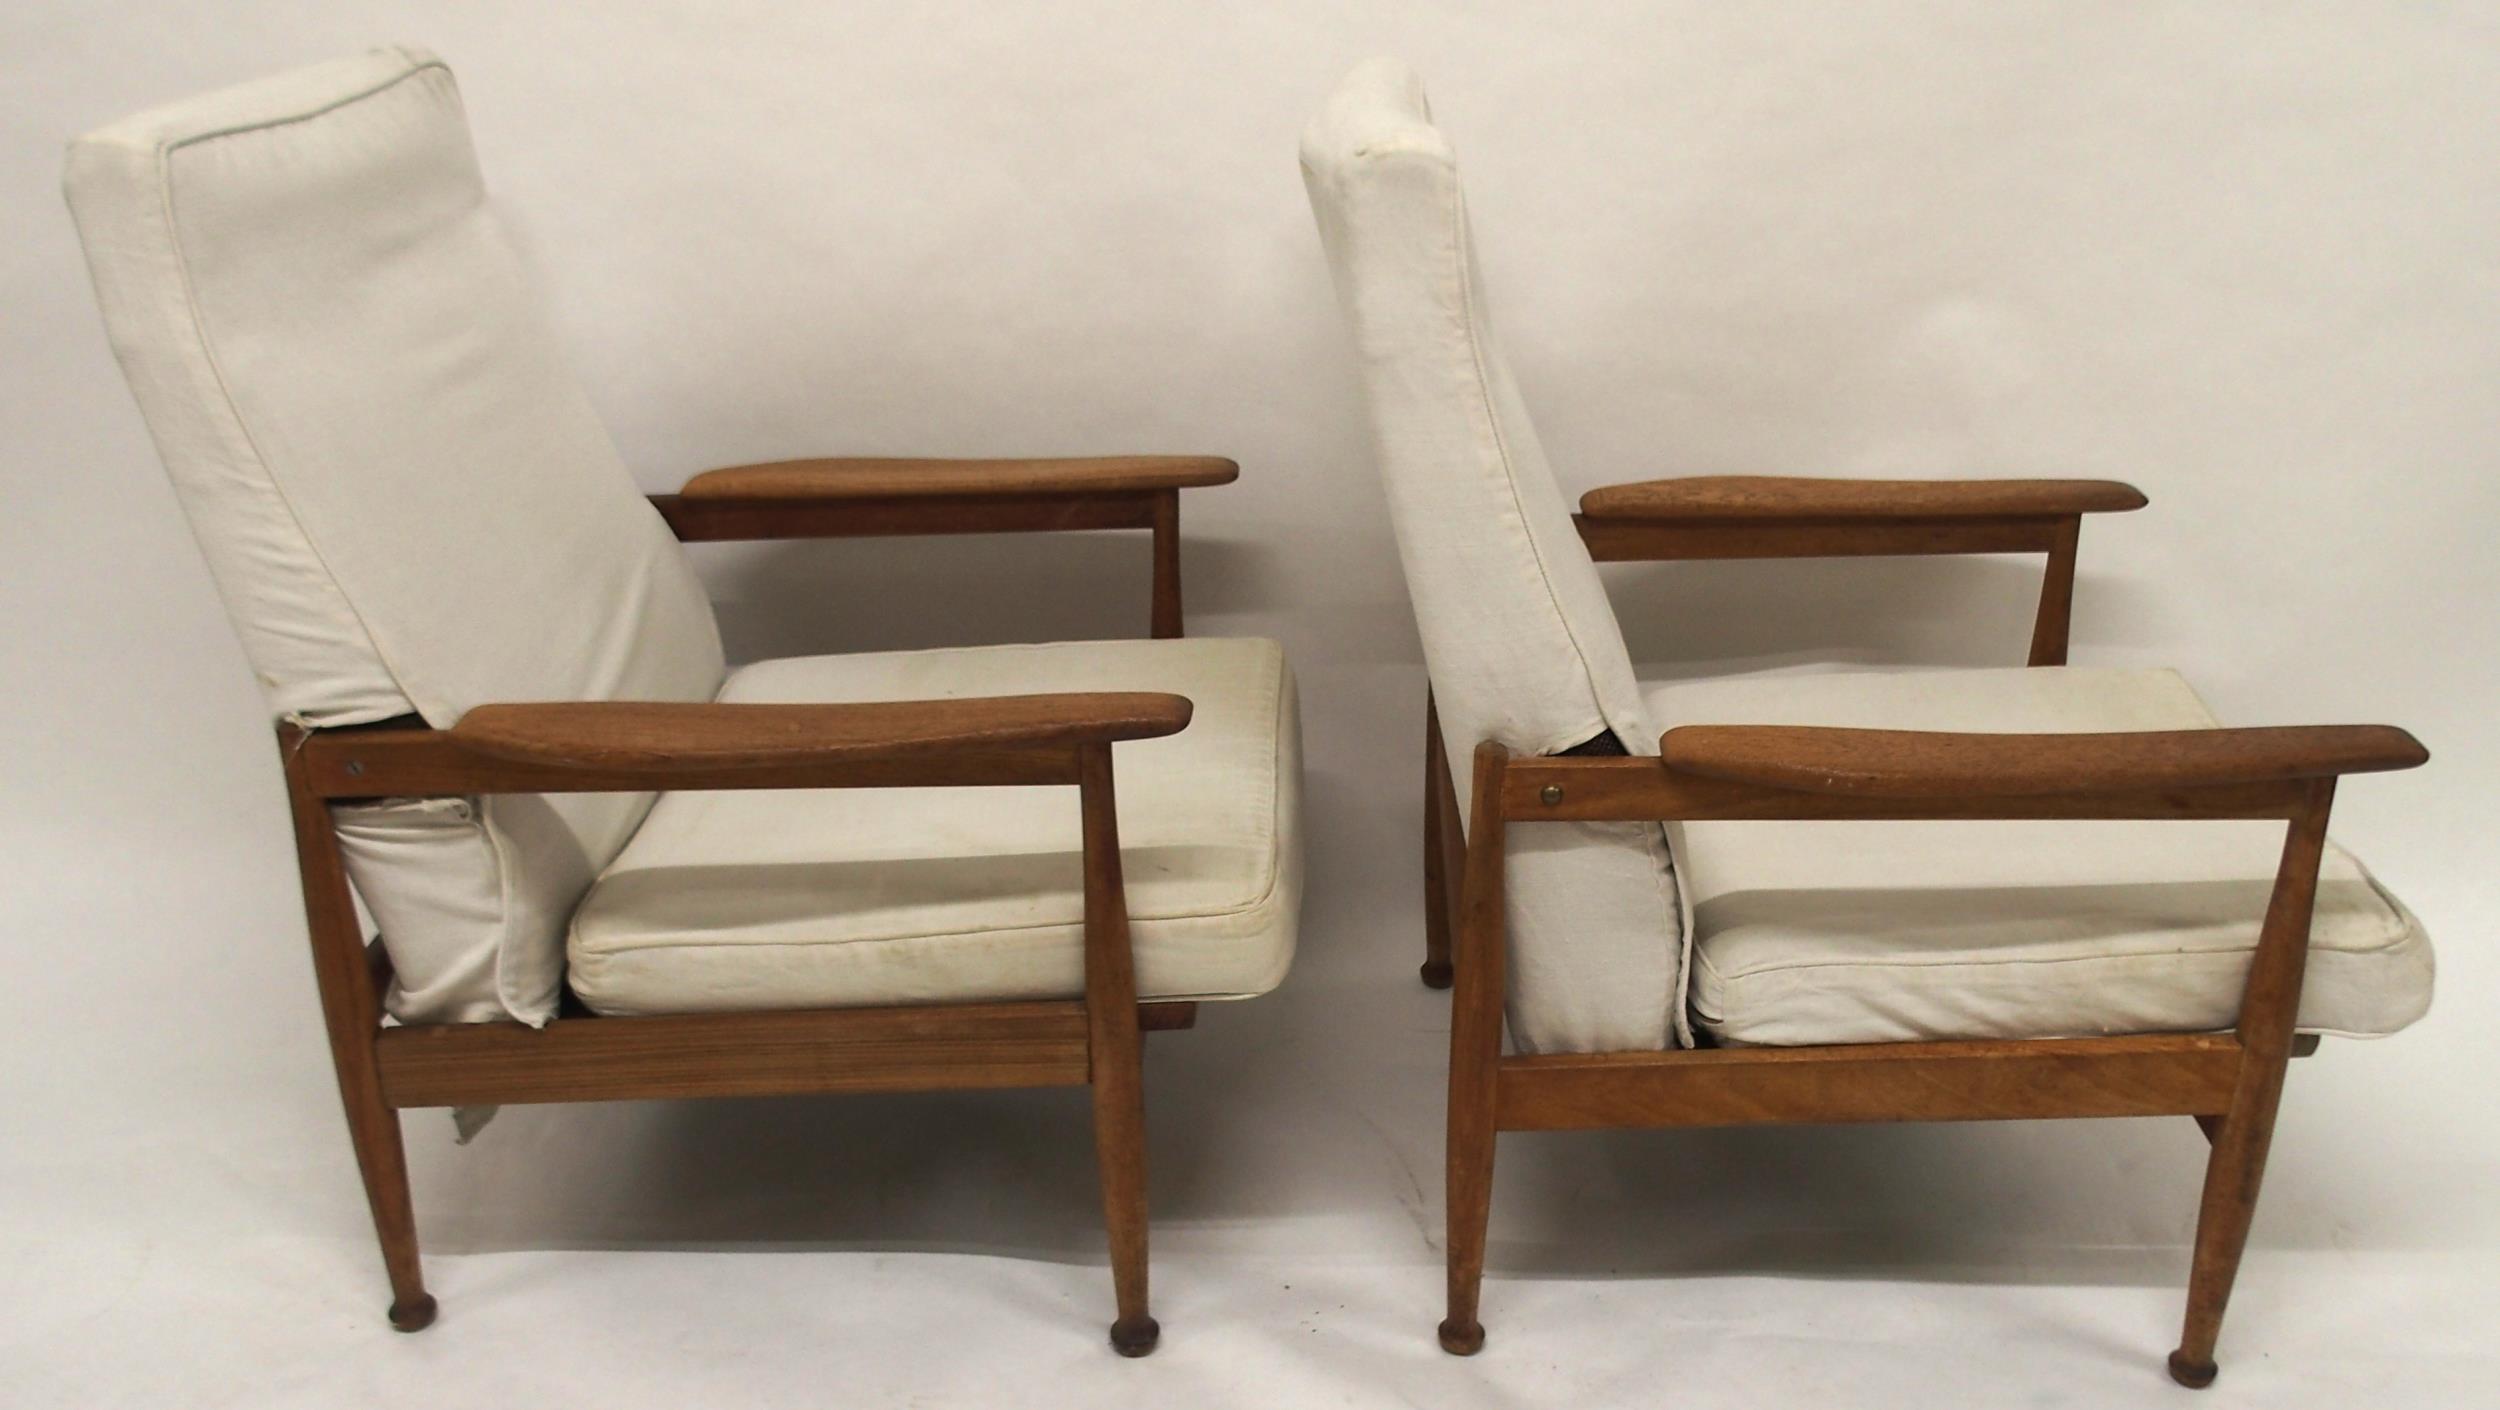 A PAIR OF GEORGE FEJER AND ERIC PAMPHILON FOR GUY ROGERS "MANHATTAN" RECLINING ARMCHAIRS with - Image 2 of 7